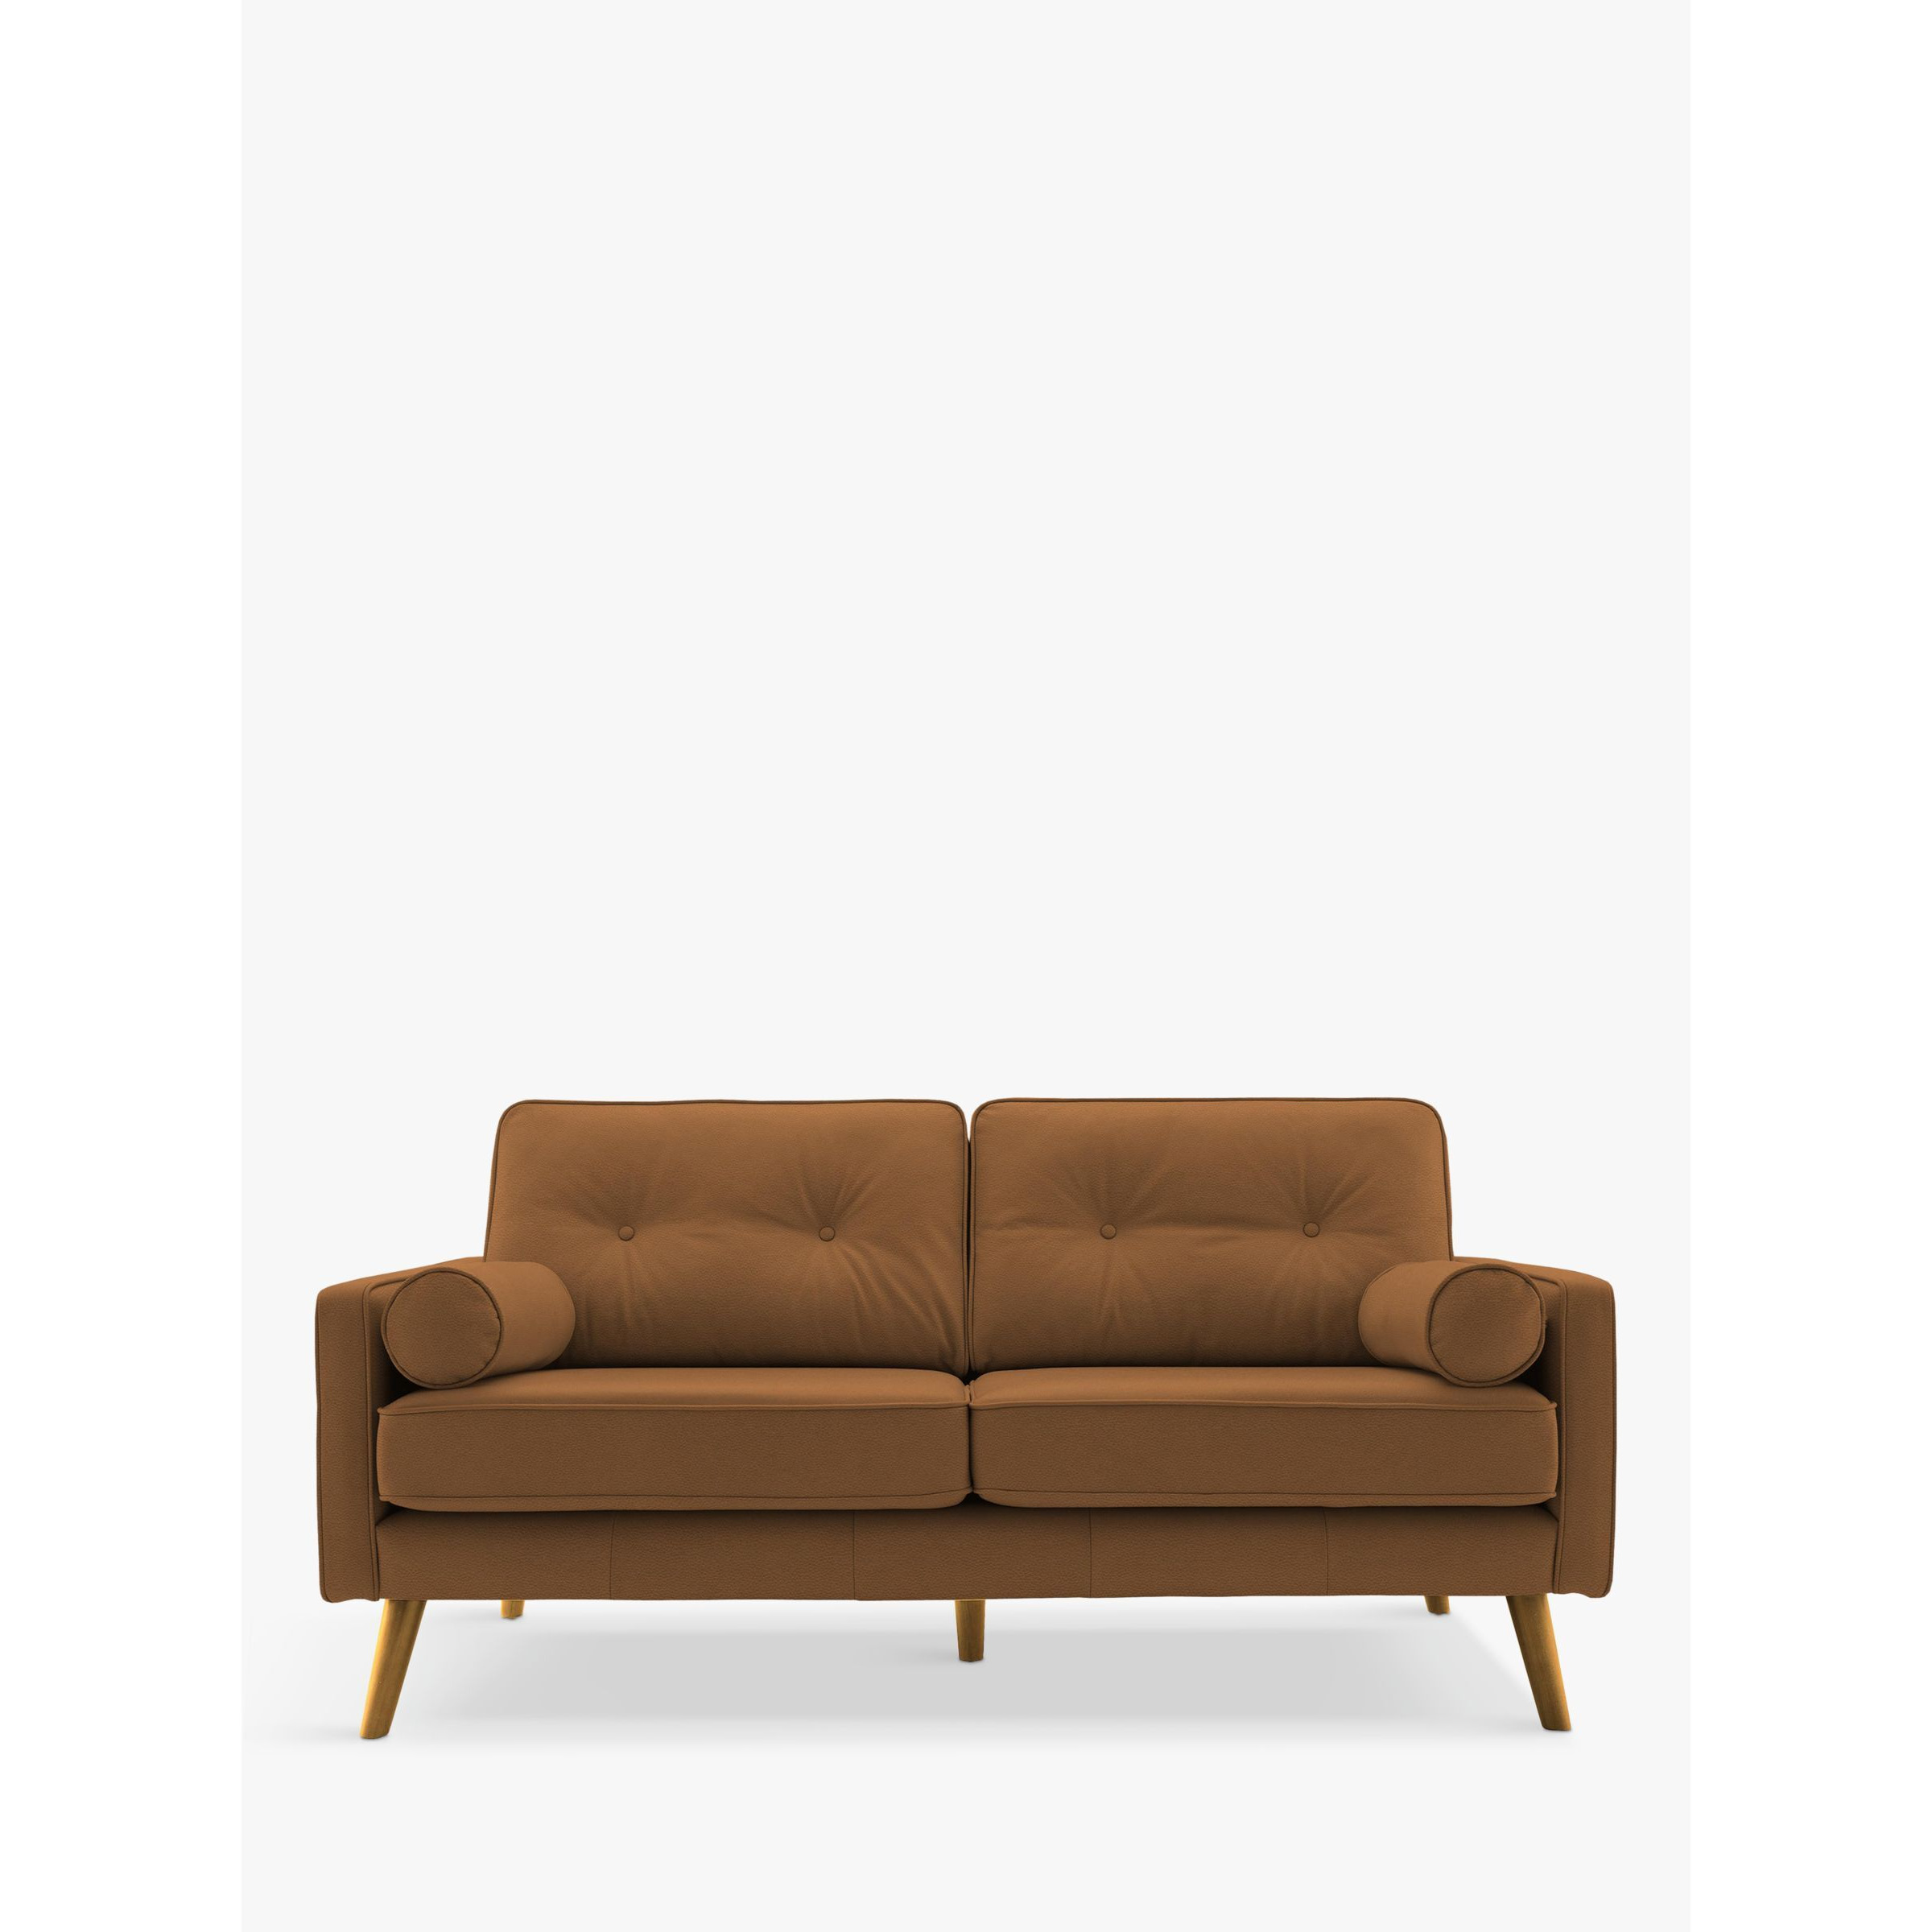 G Plan Vintage The Sixty Five Medium 2 Seater Leather Sofa - image 1